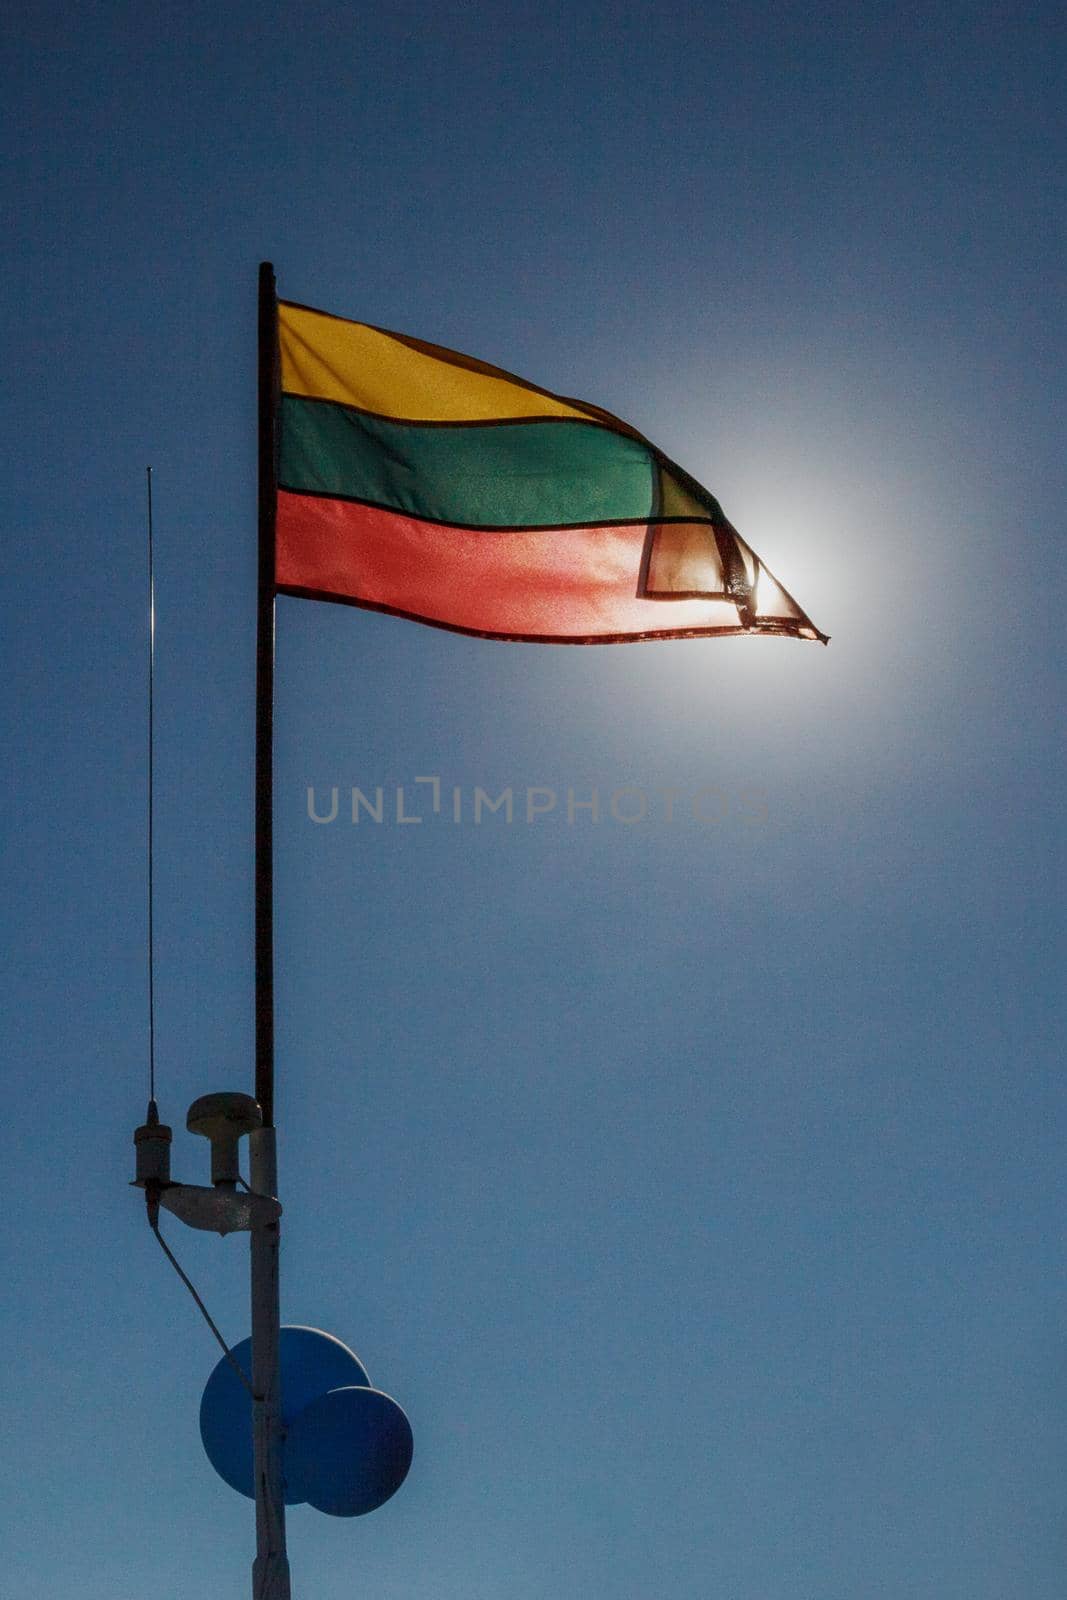 The Lithuanian flag is raised on the ship's mast, it is lit by the sun against a background of blue sky. by Lincikas